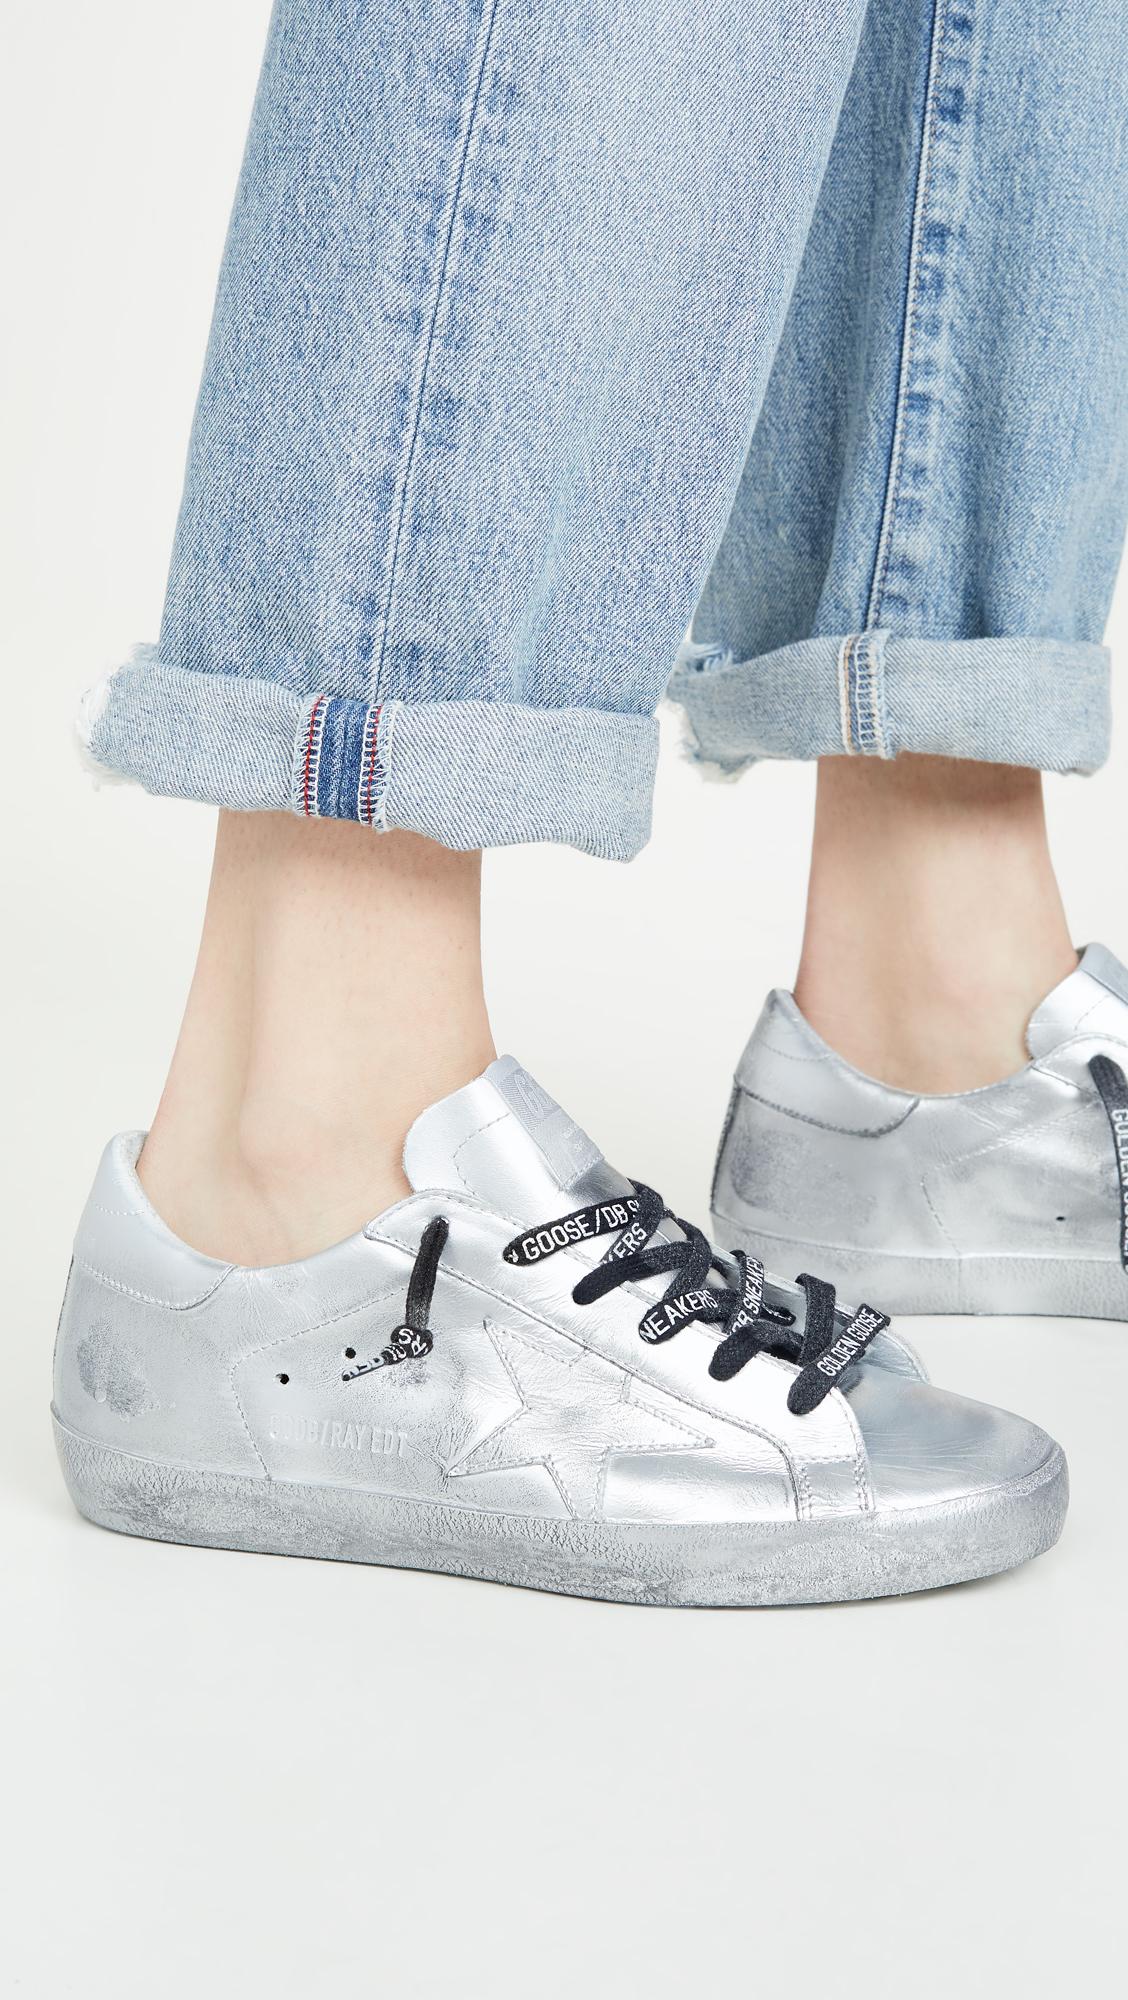 Golden Goose Leather Limited Superstar Sneakers in Silver (Metallic) - Lyst